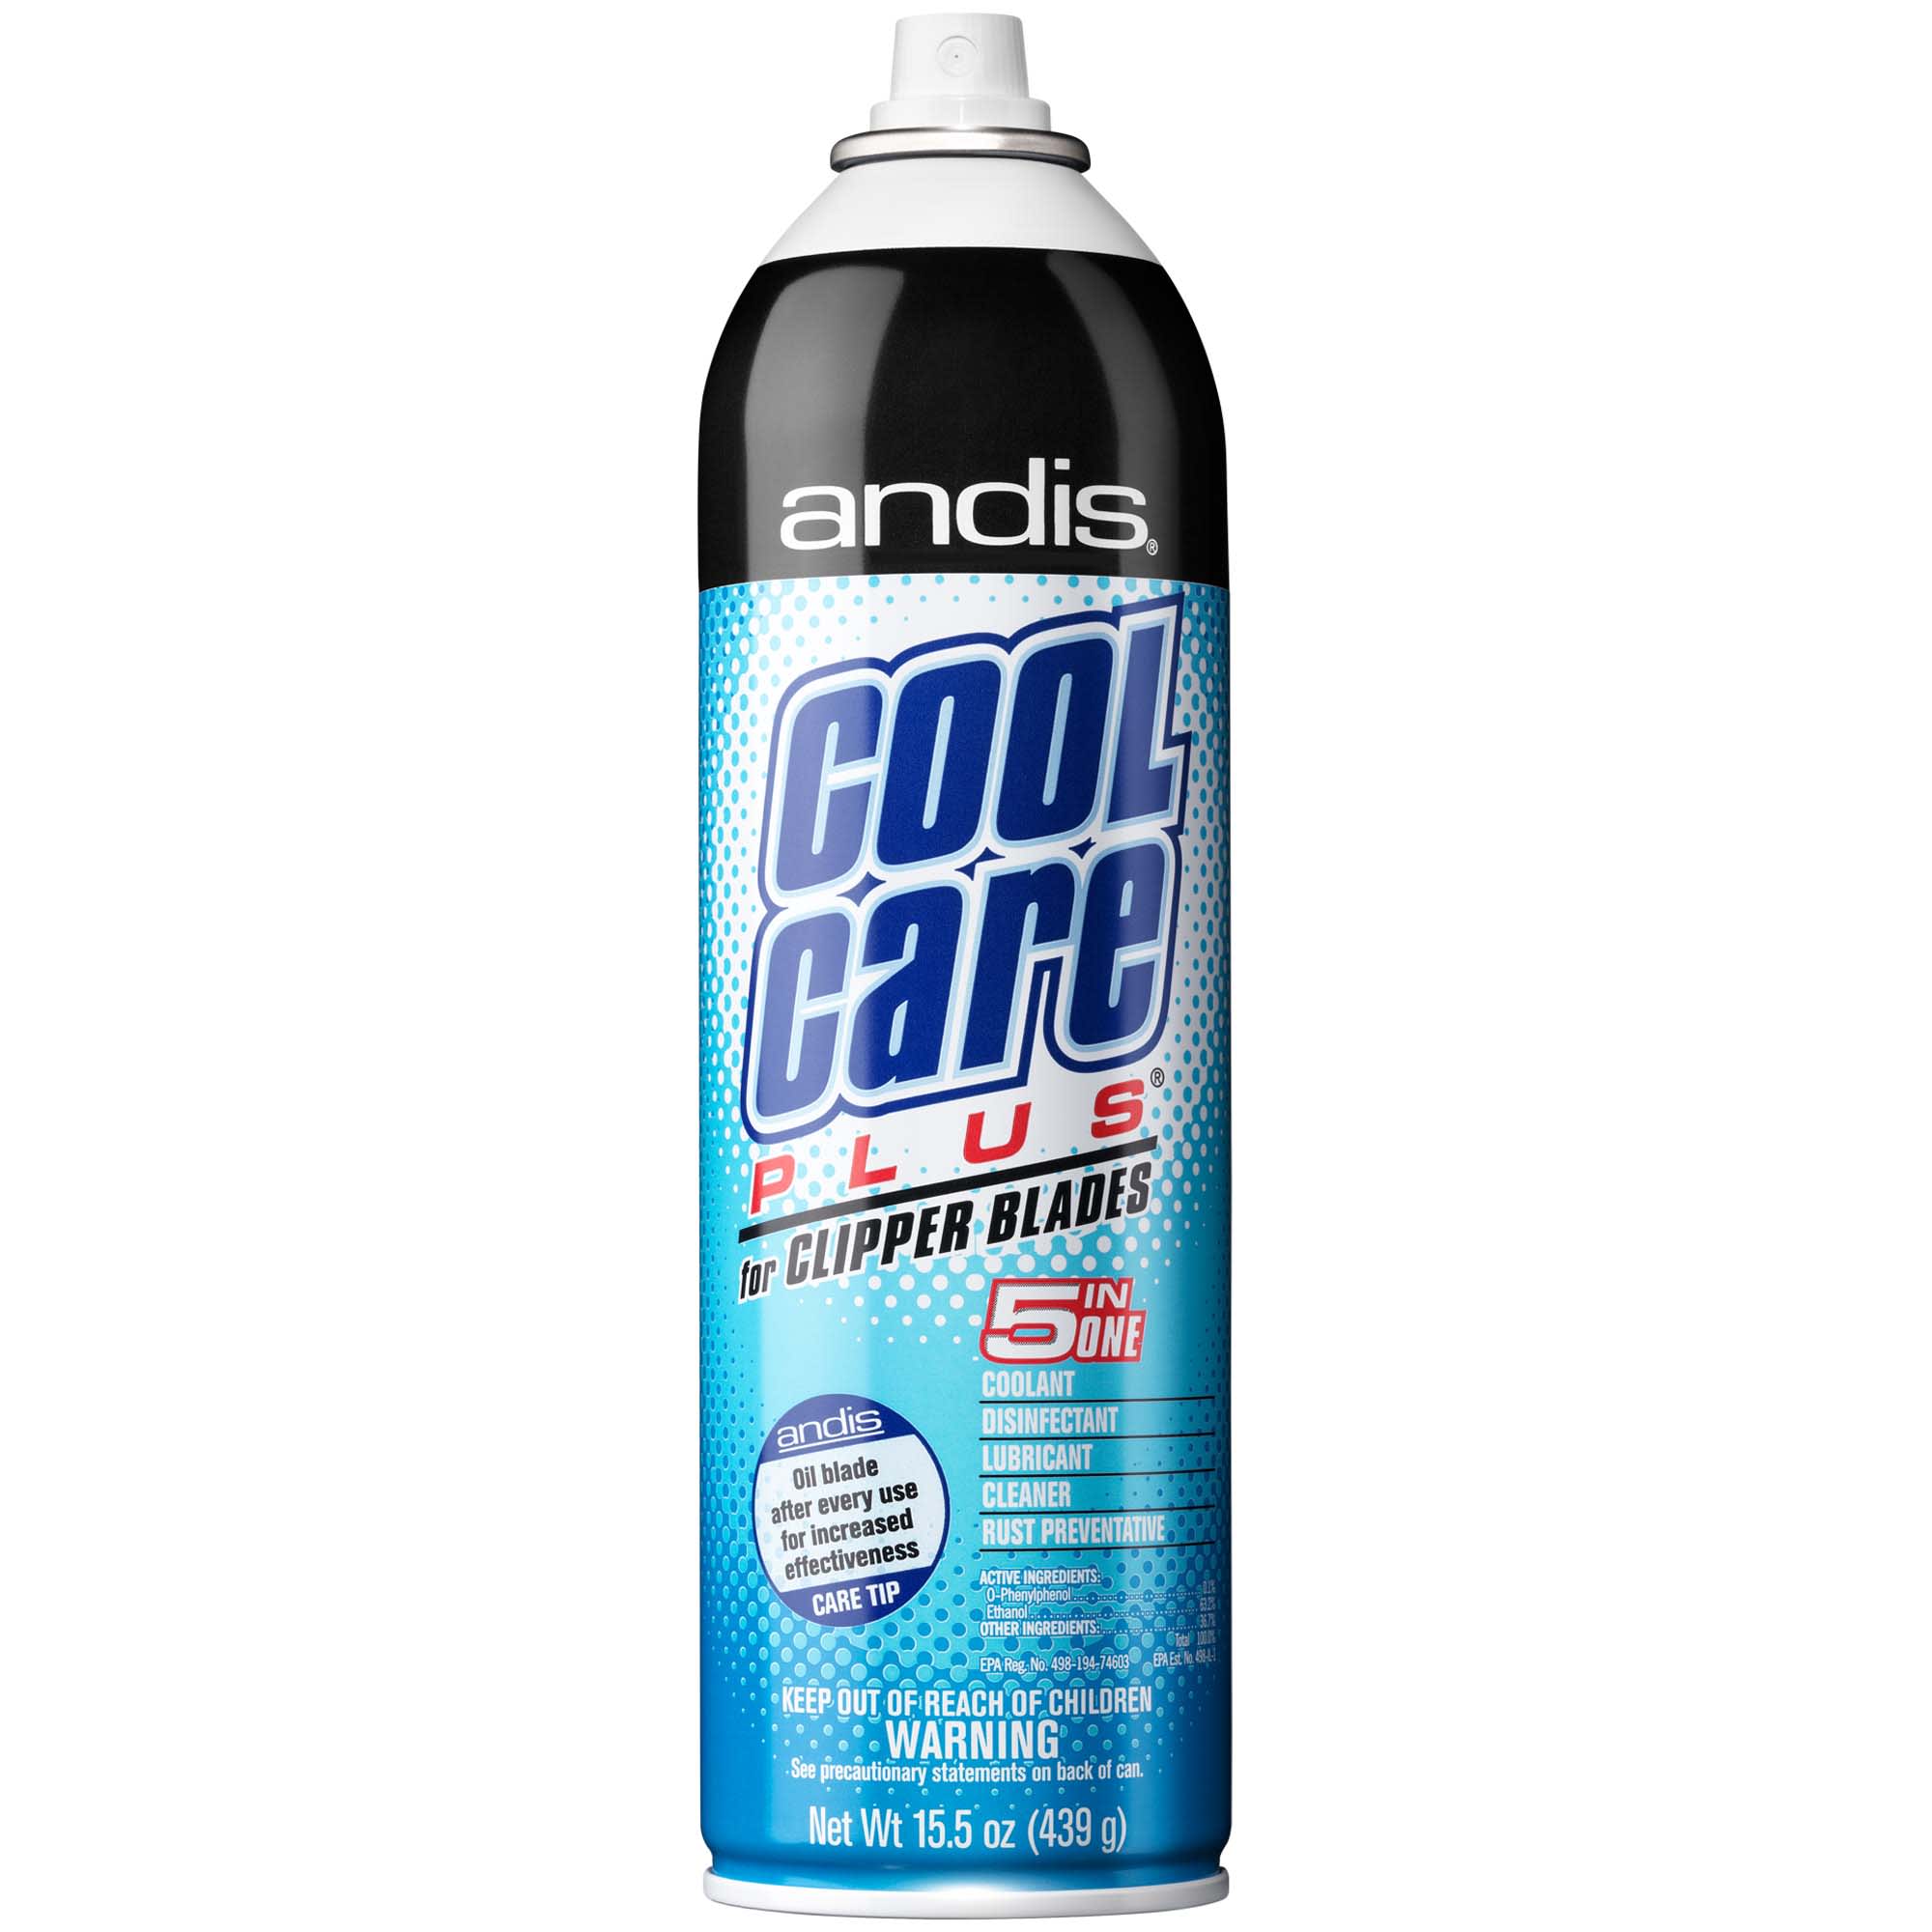 Andis Coolcare Maintenance Product 6oz